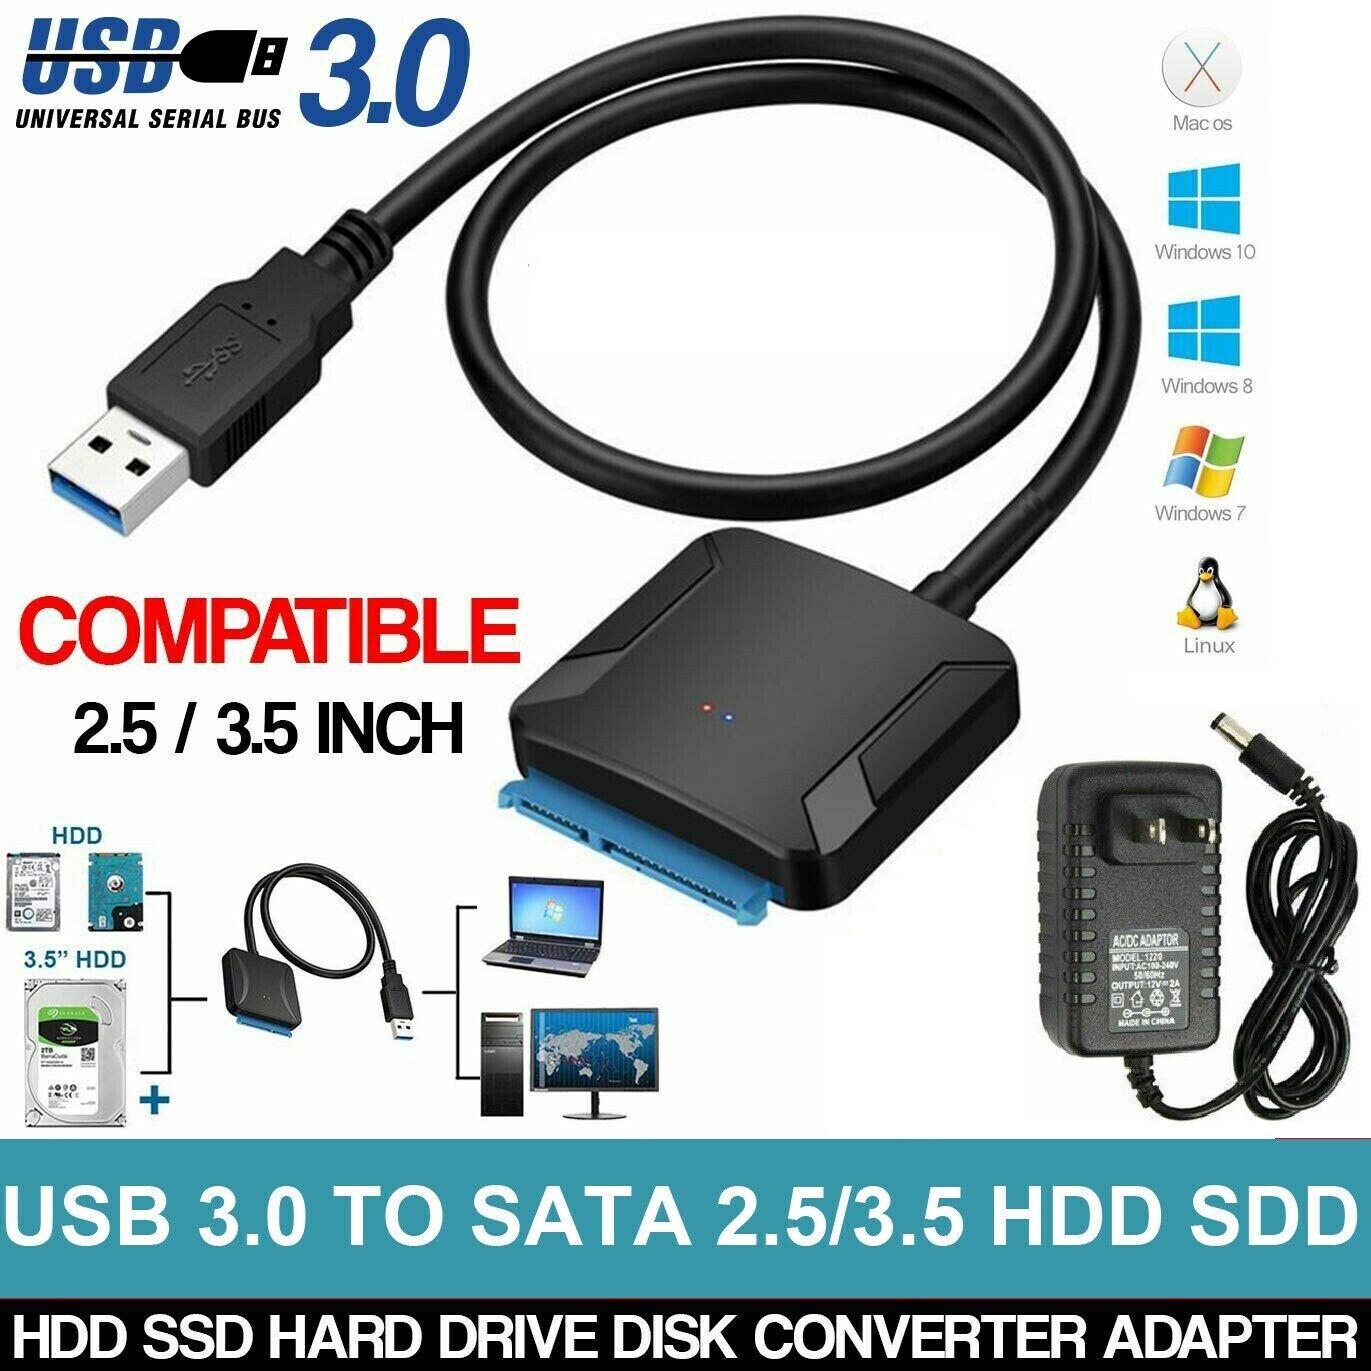 USB 3.0 to SATA III Adapter for 2.5" 3.5" SSD HDD Hard Drive with 12V/2A Power